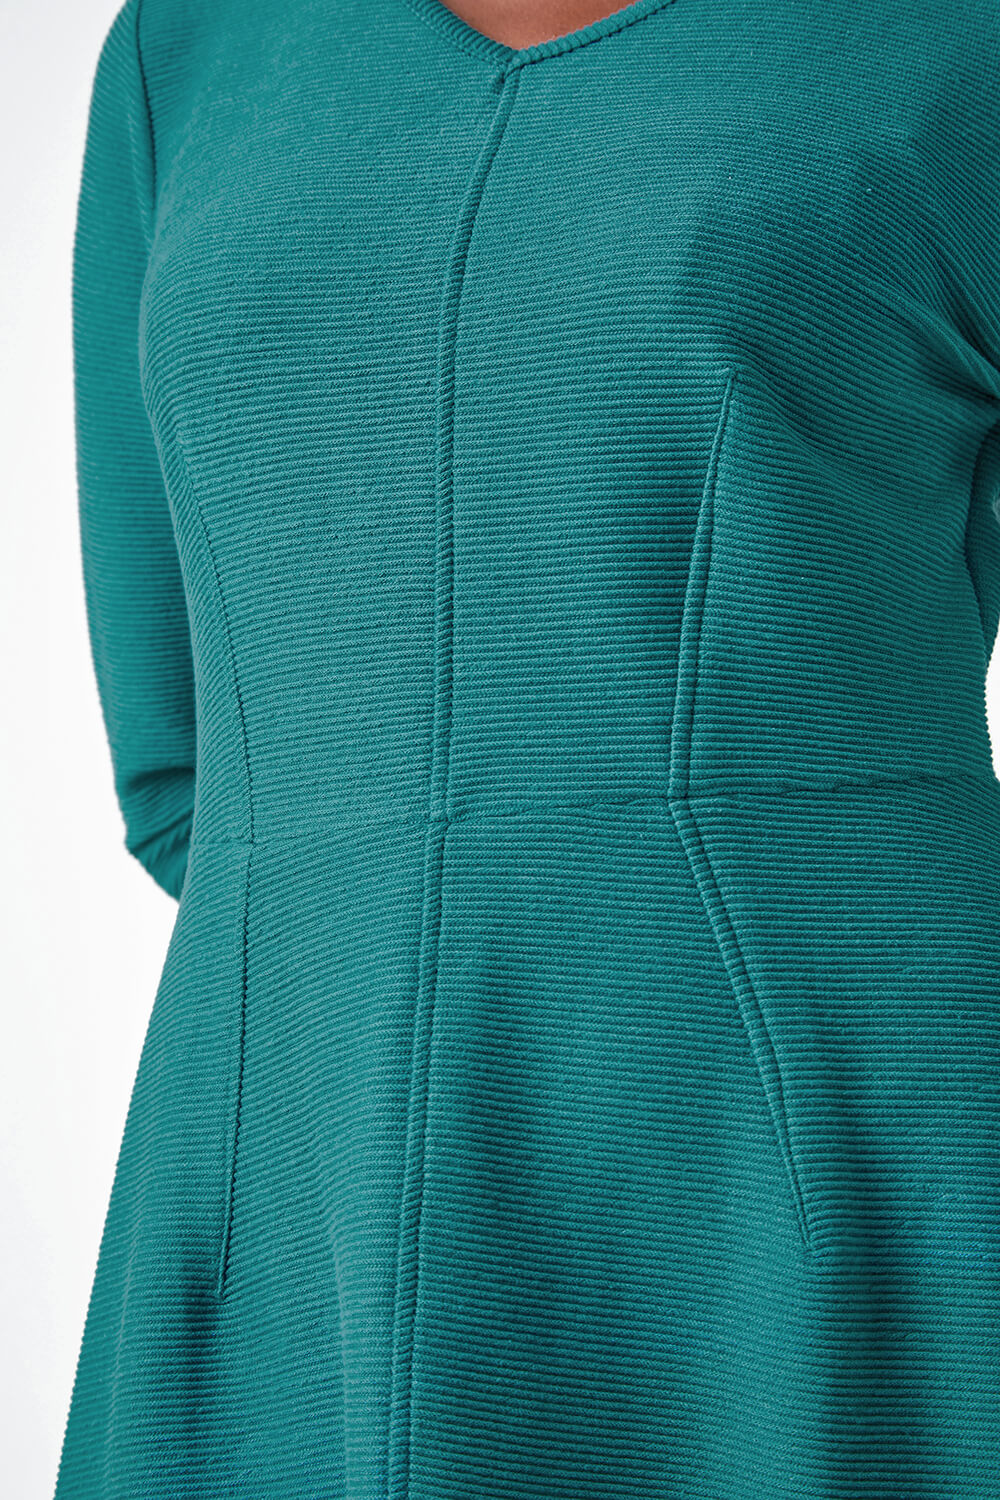 Forest  Cotton Blend Ribbed Stretch Dress, Image 5 of 5